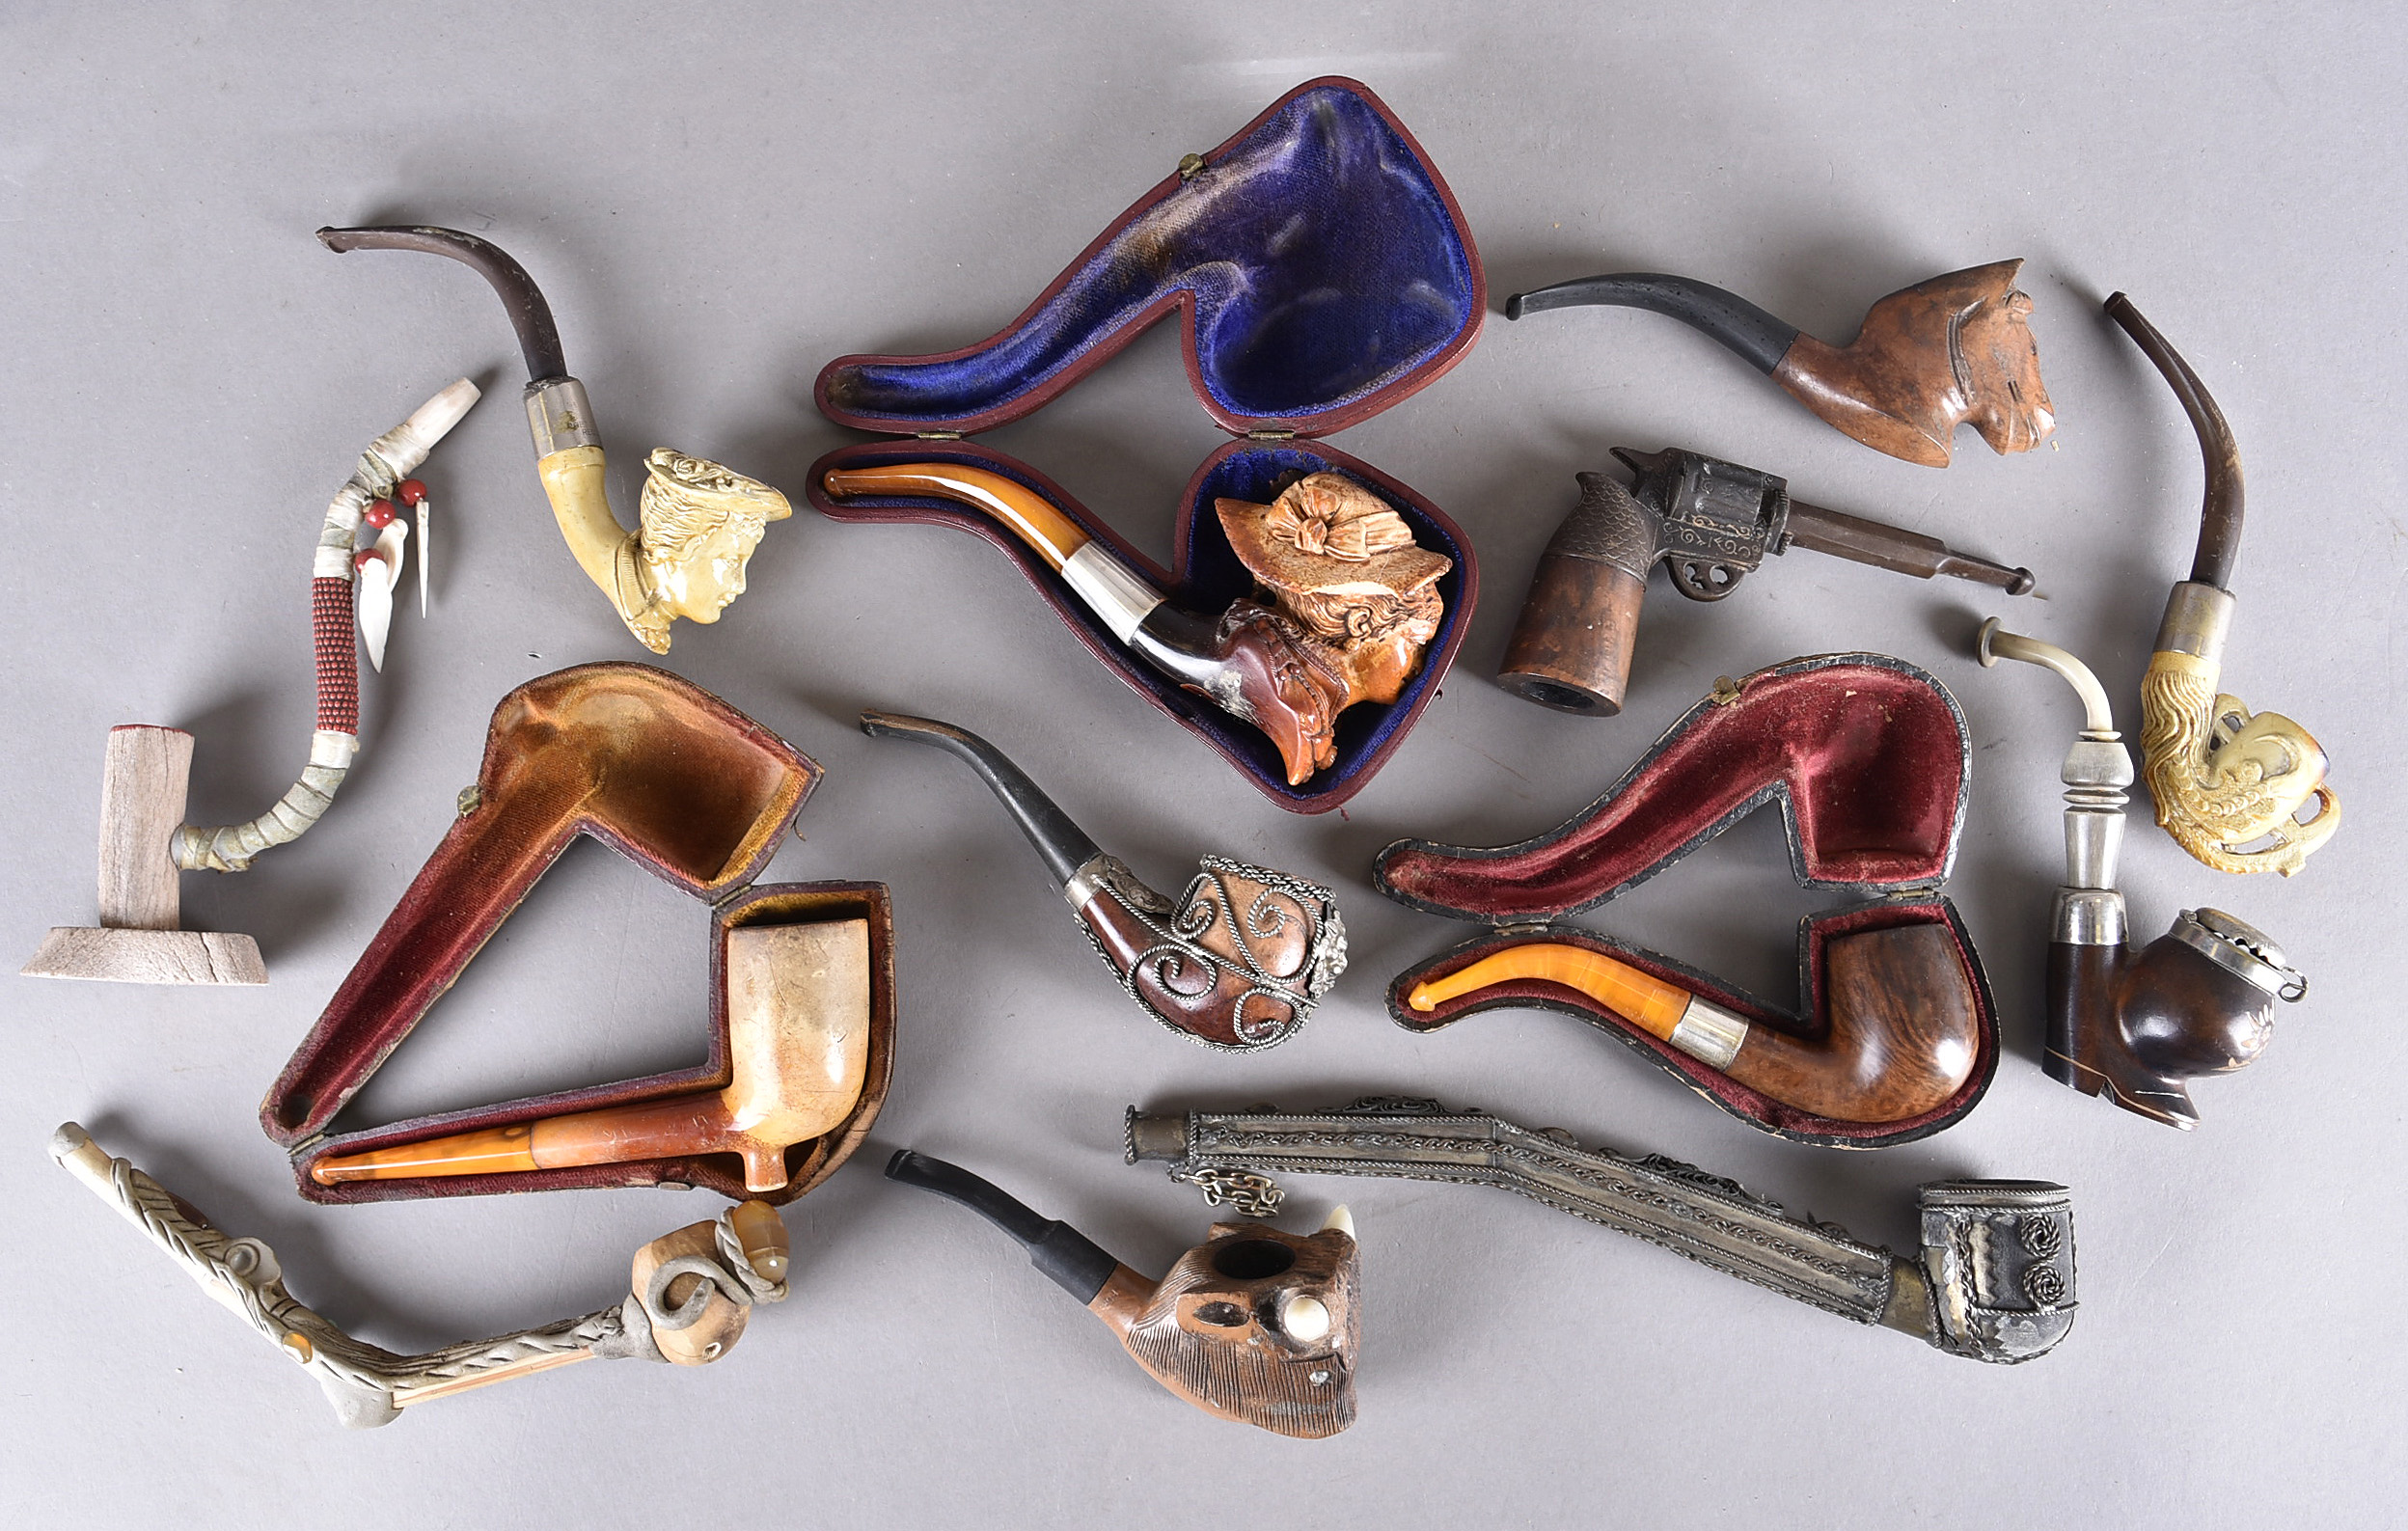 A miscellaneous collection of pipes, including three with amber stems